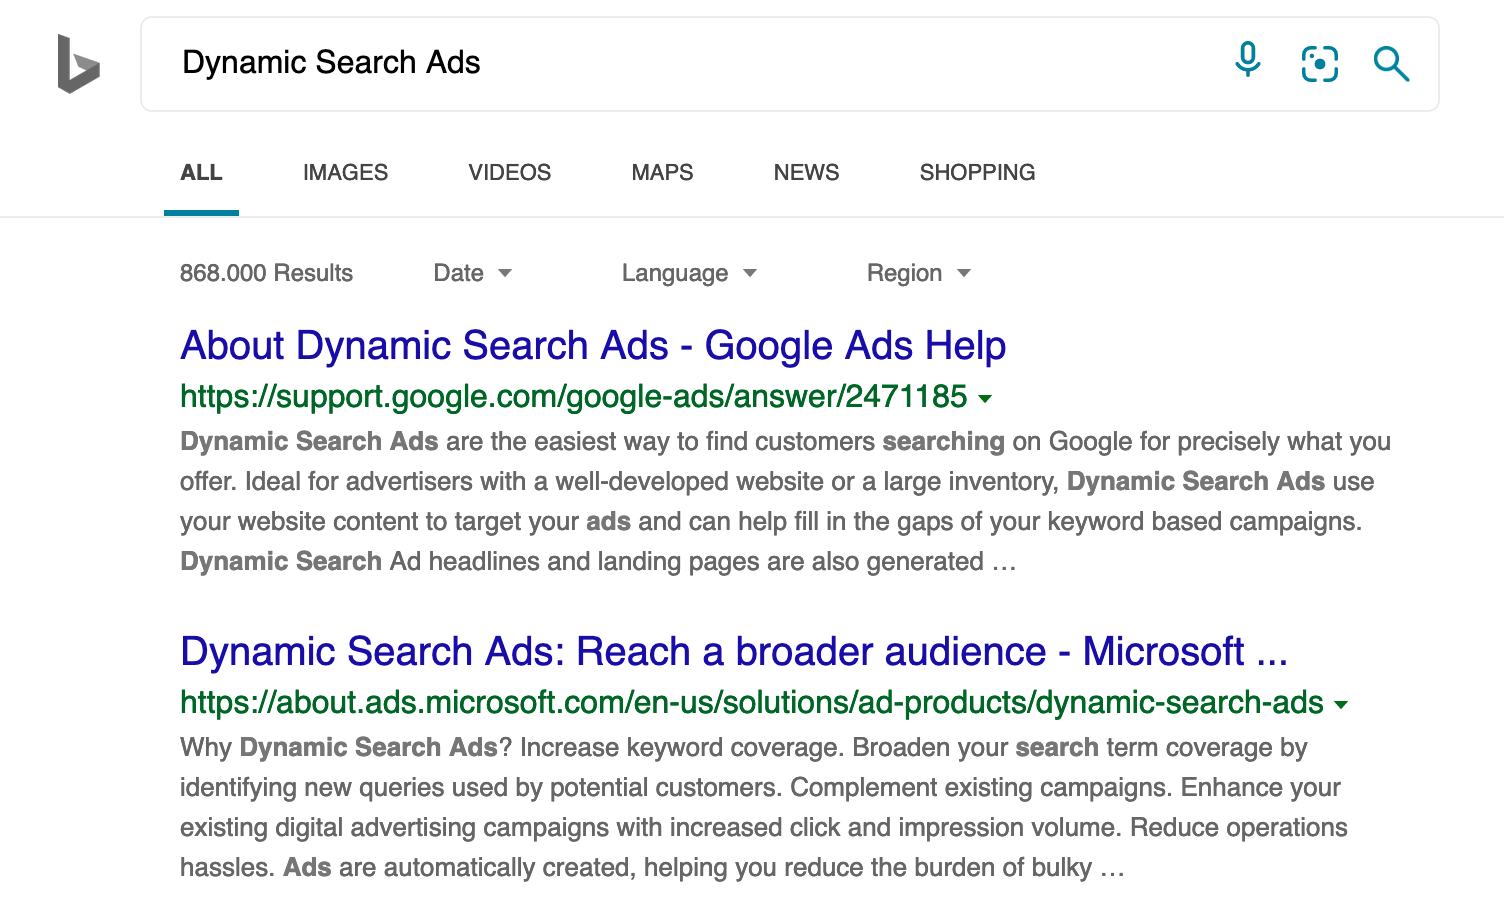 Microsoft extends Dynamic Search Ads (DSA) into more 8 countries